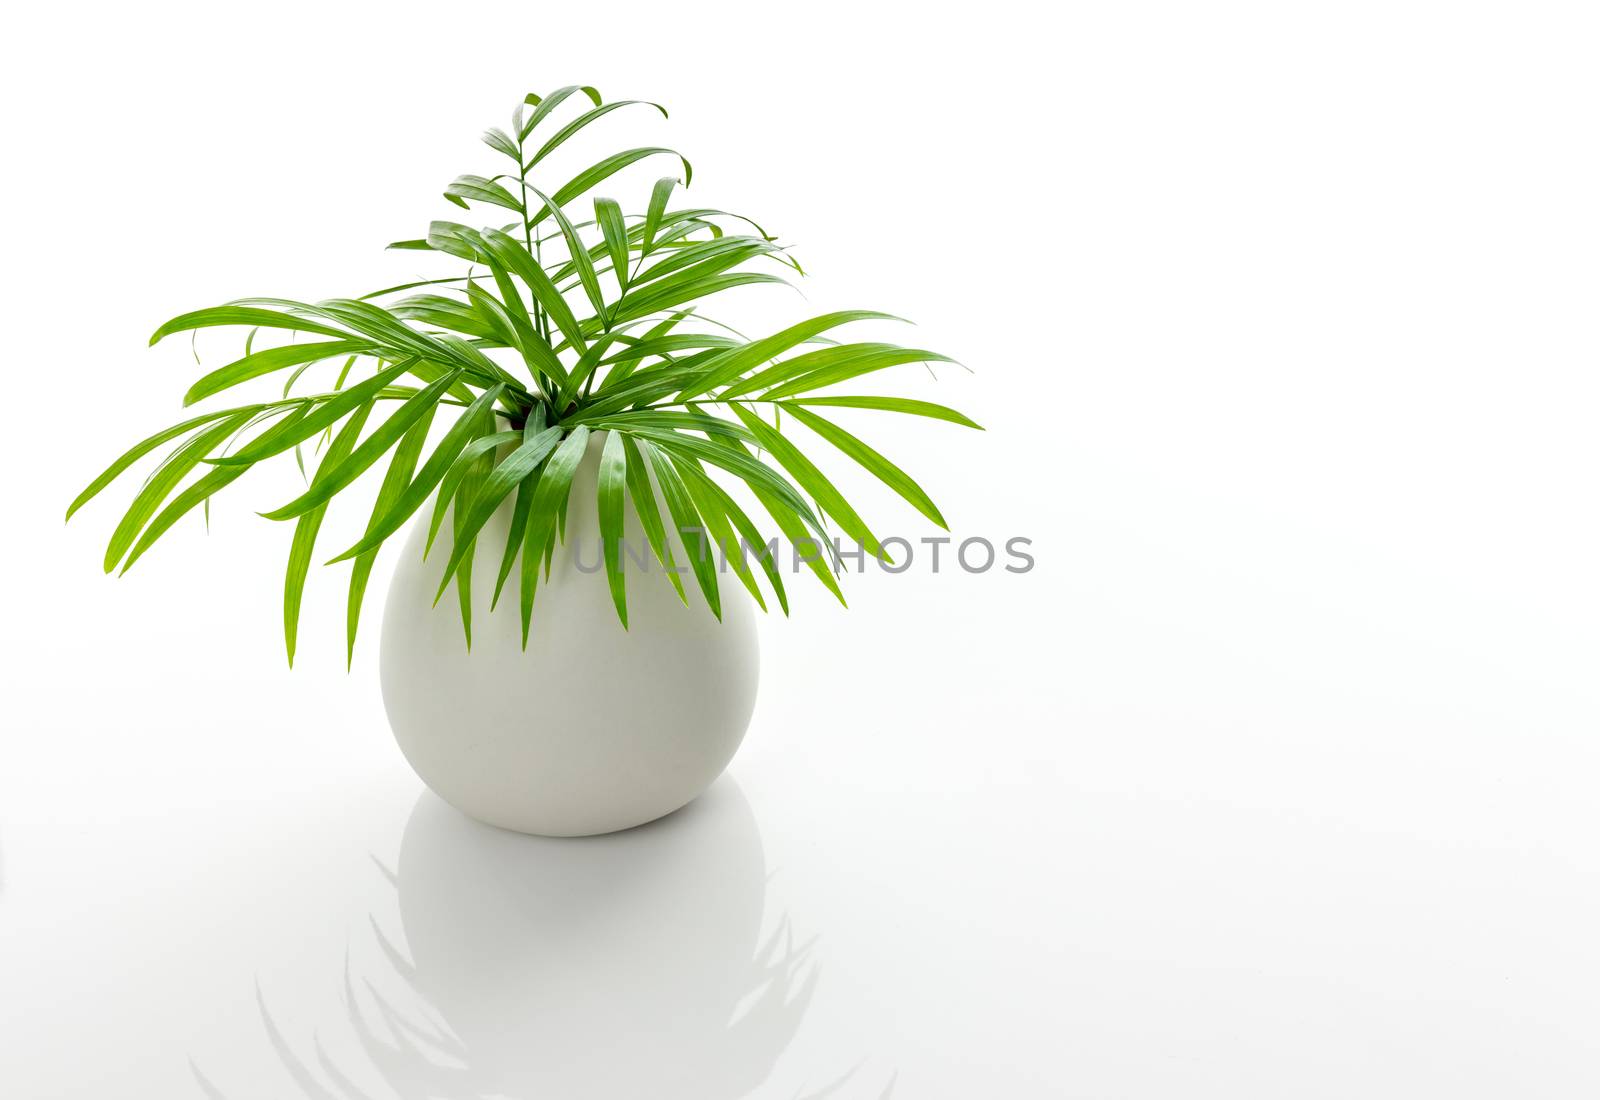 Green palm leaves in a white ceramic vase, on white background, with reflection.